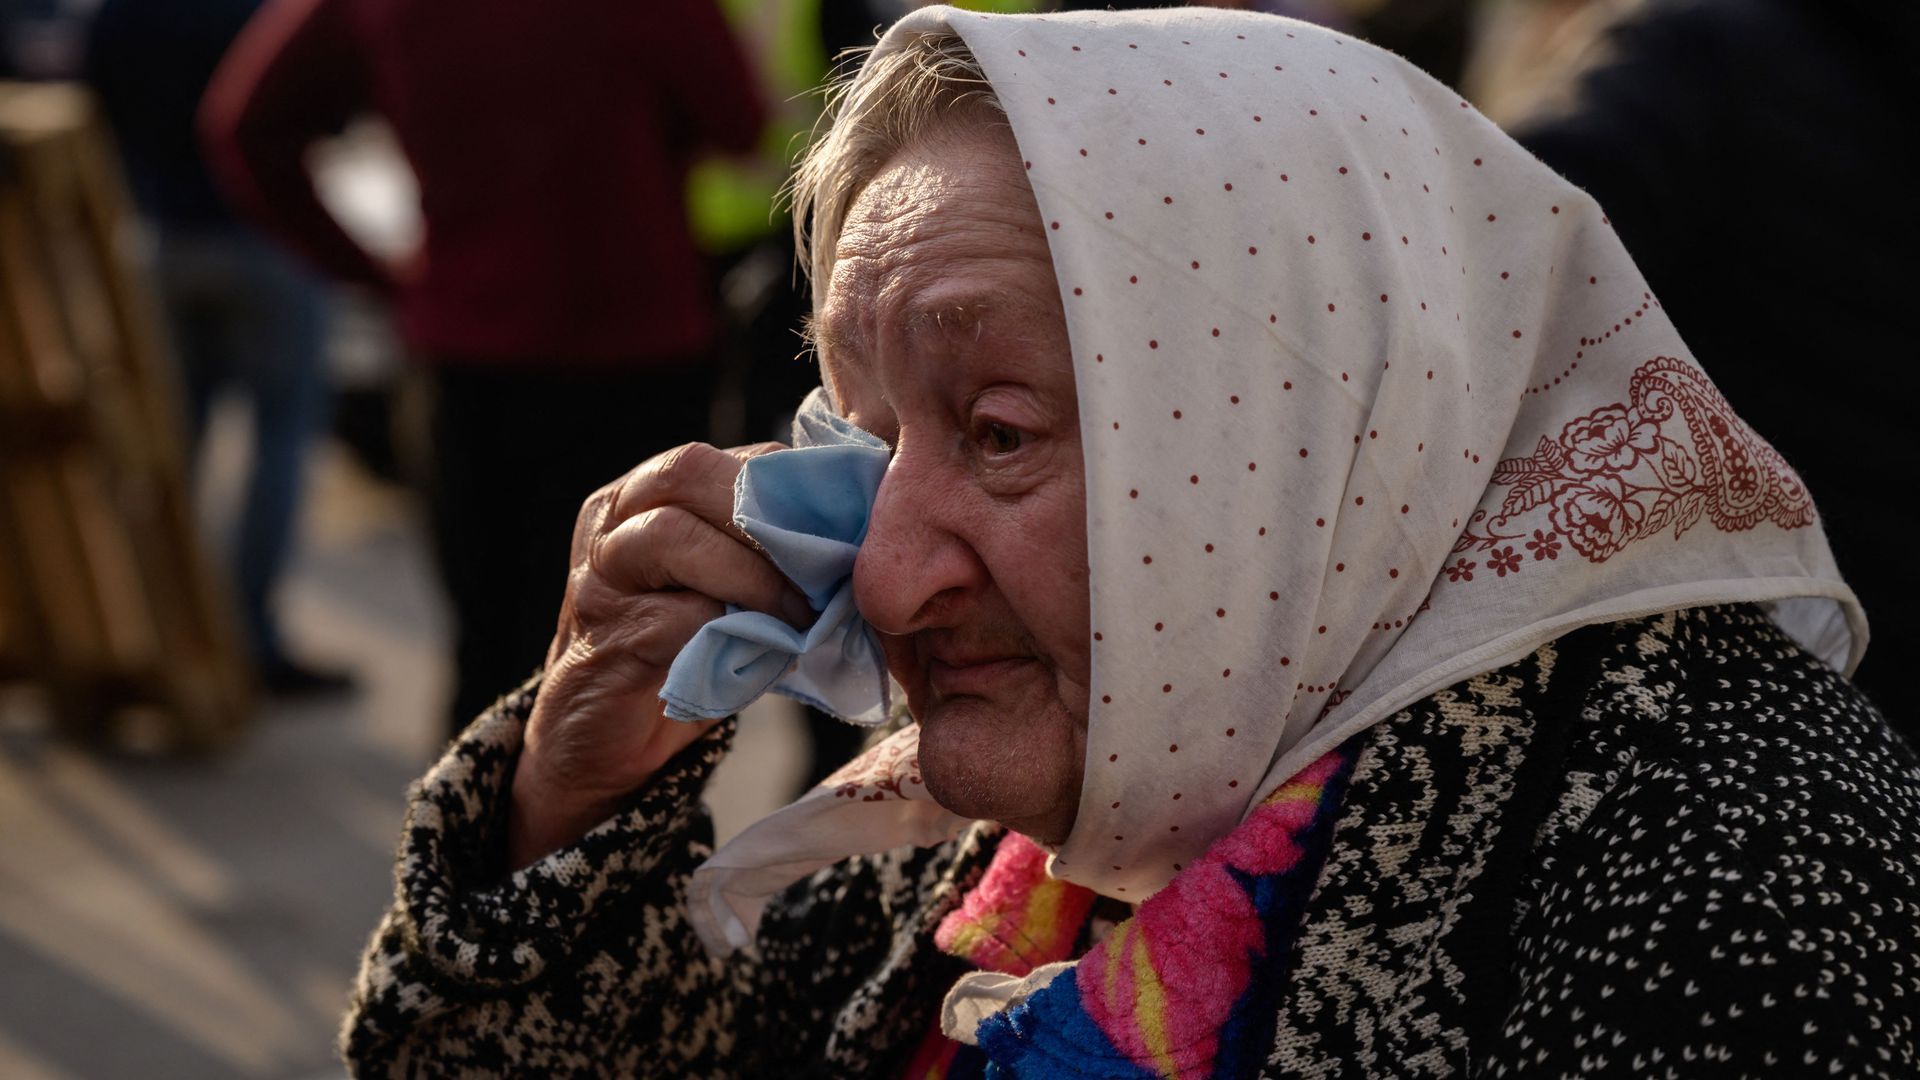 A woman who fled Mariupol reacts as she arrives in a private vehicle at a registration and processing area for internally displaced people in Zaporizhzhia, Ukraine, on May 2. 